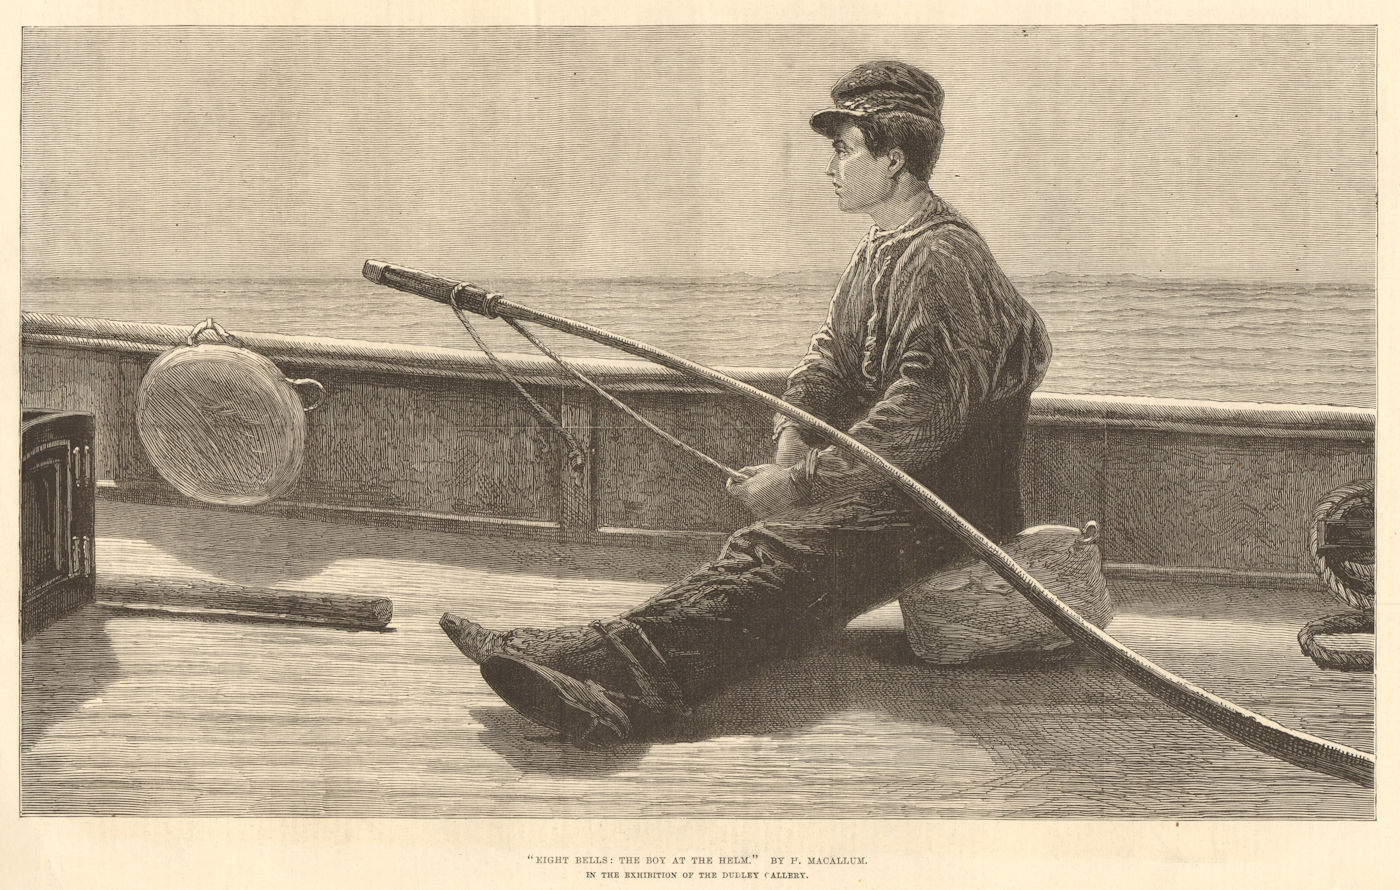 "Eight bells: The boy at the helm", by H. Macallum. Boats. Children 1876 print